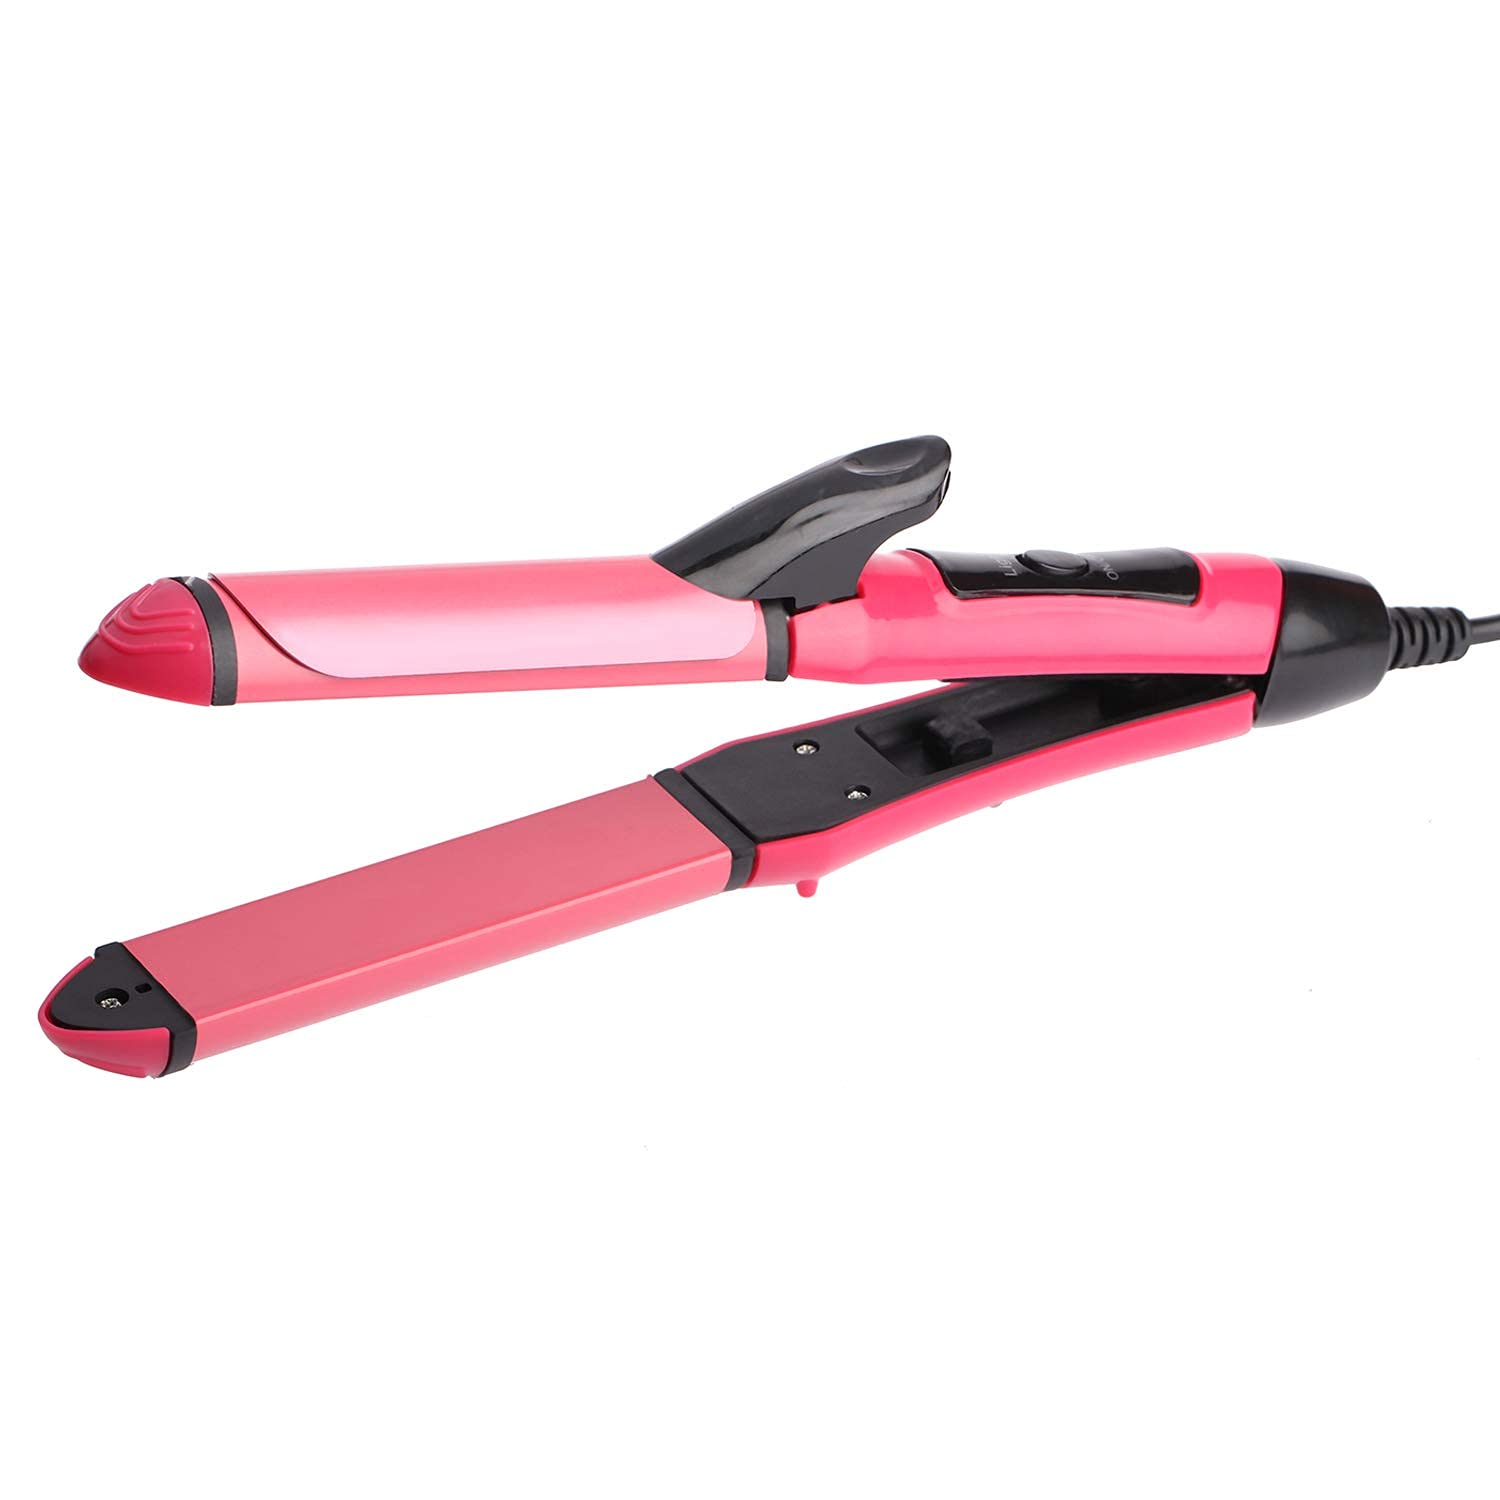 SHREE ENTERPRISE Women 2-in-1 Hair Straightener (pink) and Curler with Ceramic Plate